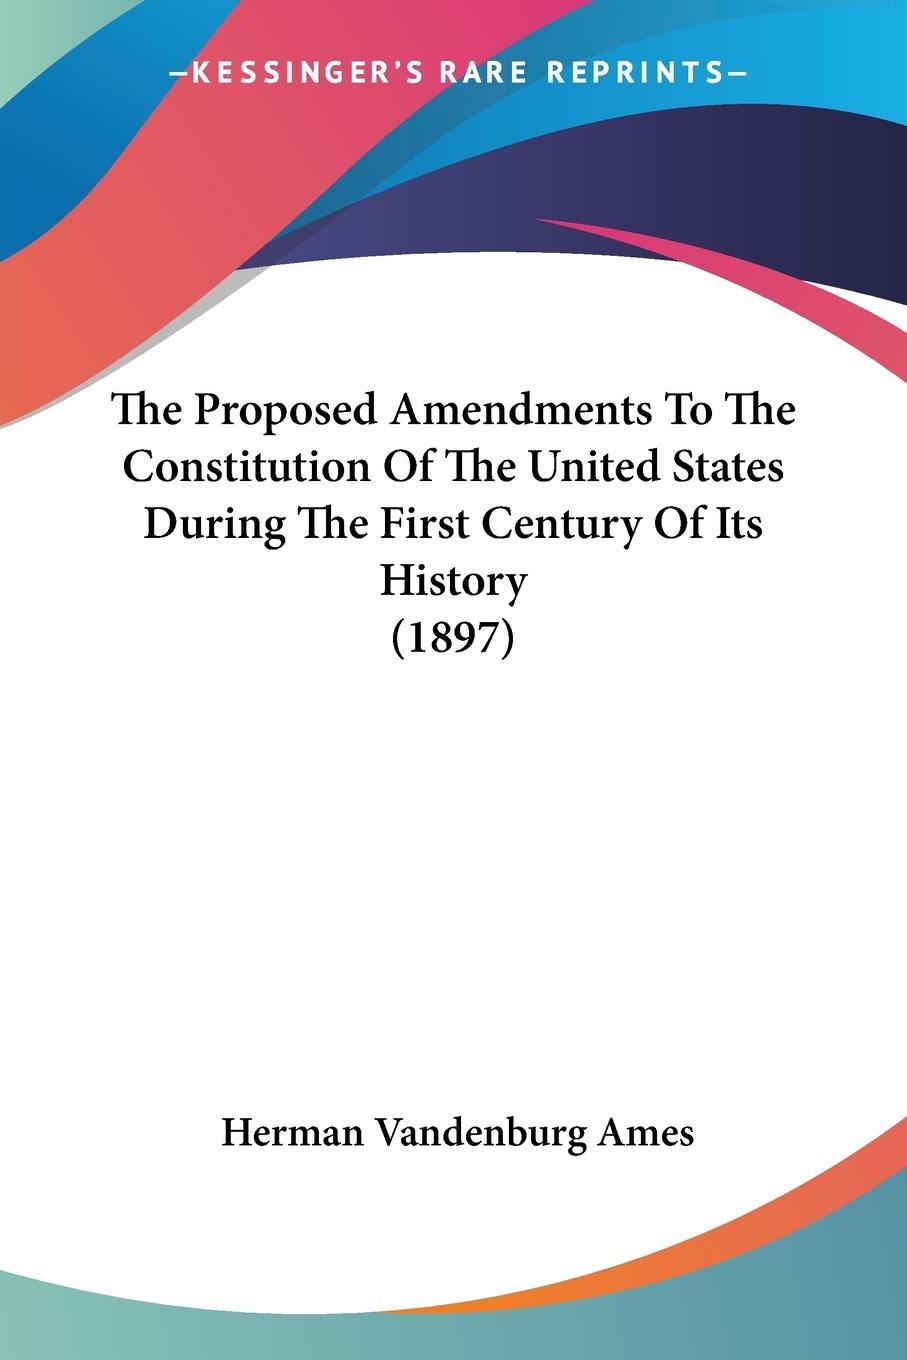 The Proposed Amendments To The Constitution Of The United States During The First Century Of Its History (1897) - Ames, Herman Vandenburg